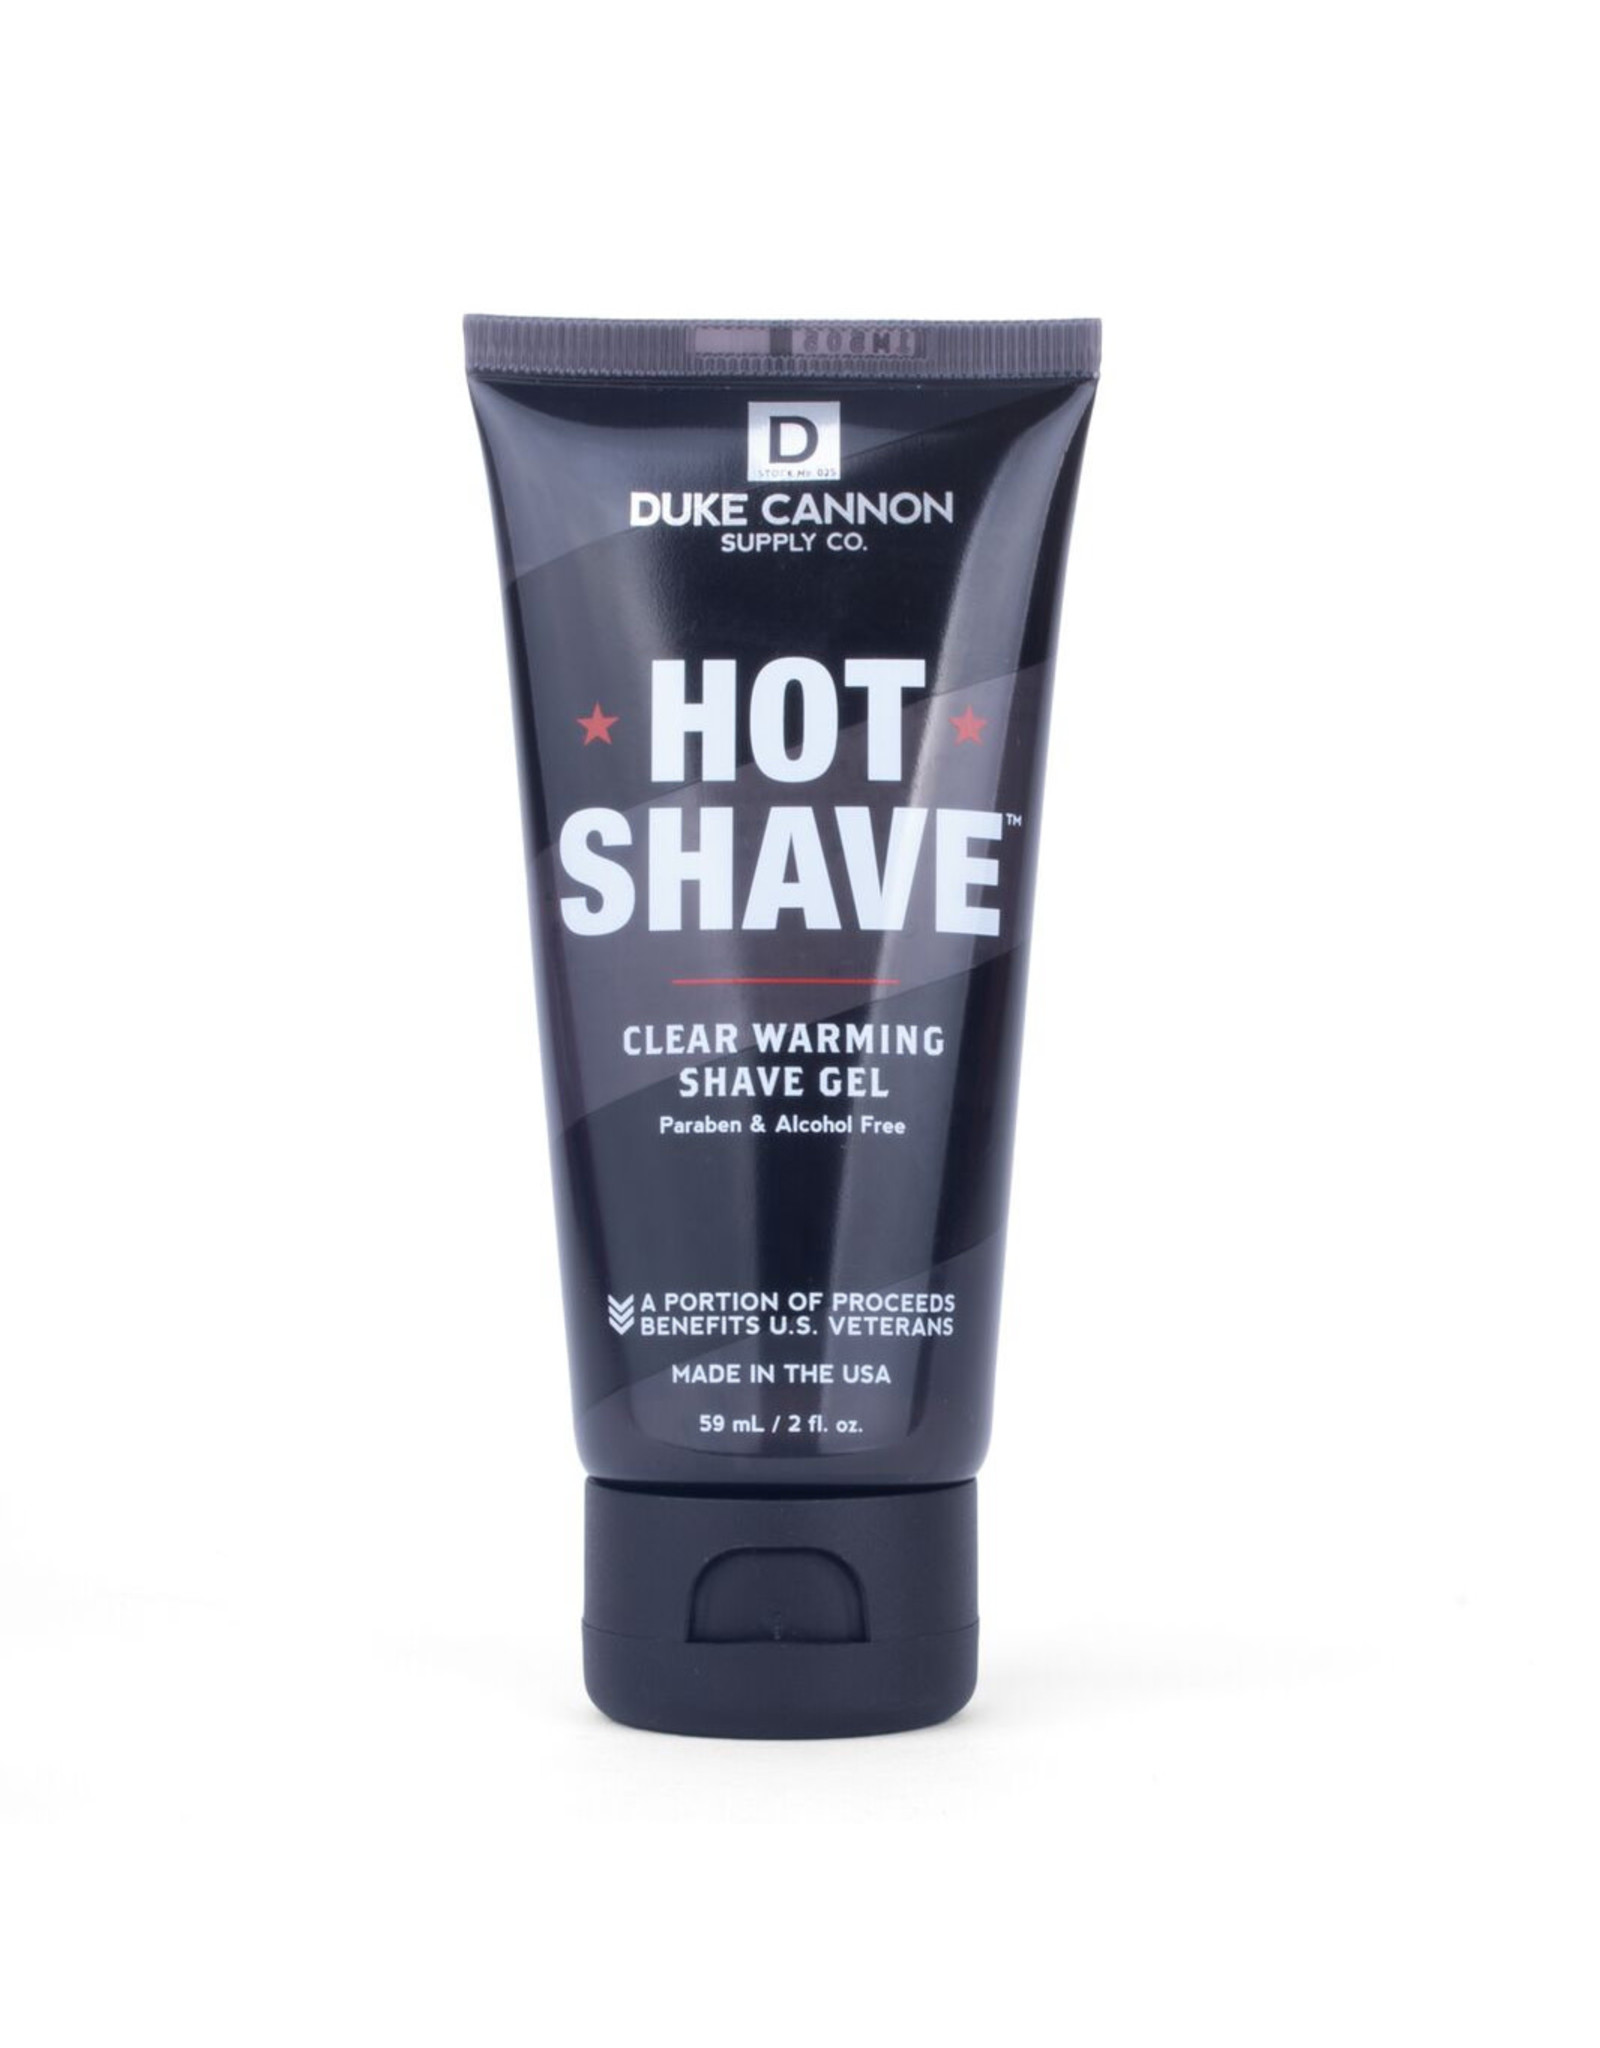 Duke Cannon Supply Co. Hot Shave Clear Warming Shave Gel - Travel Size